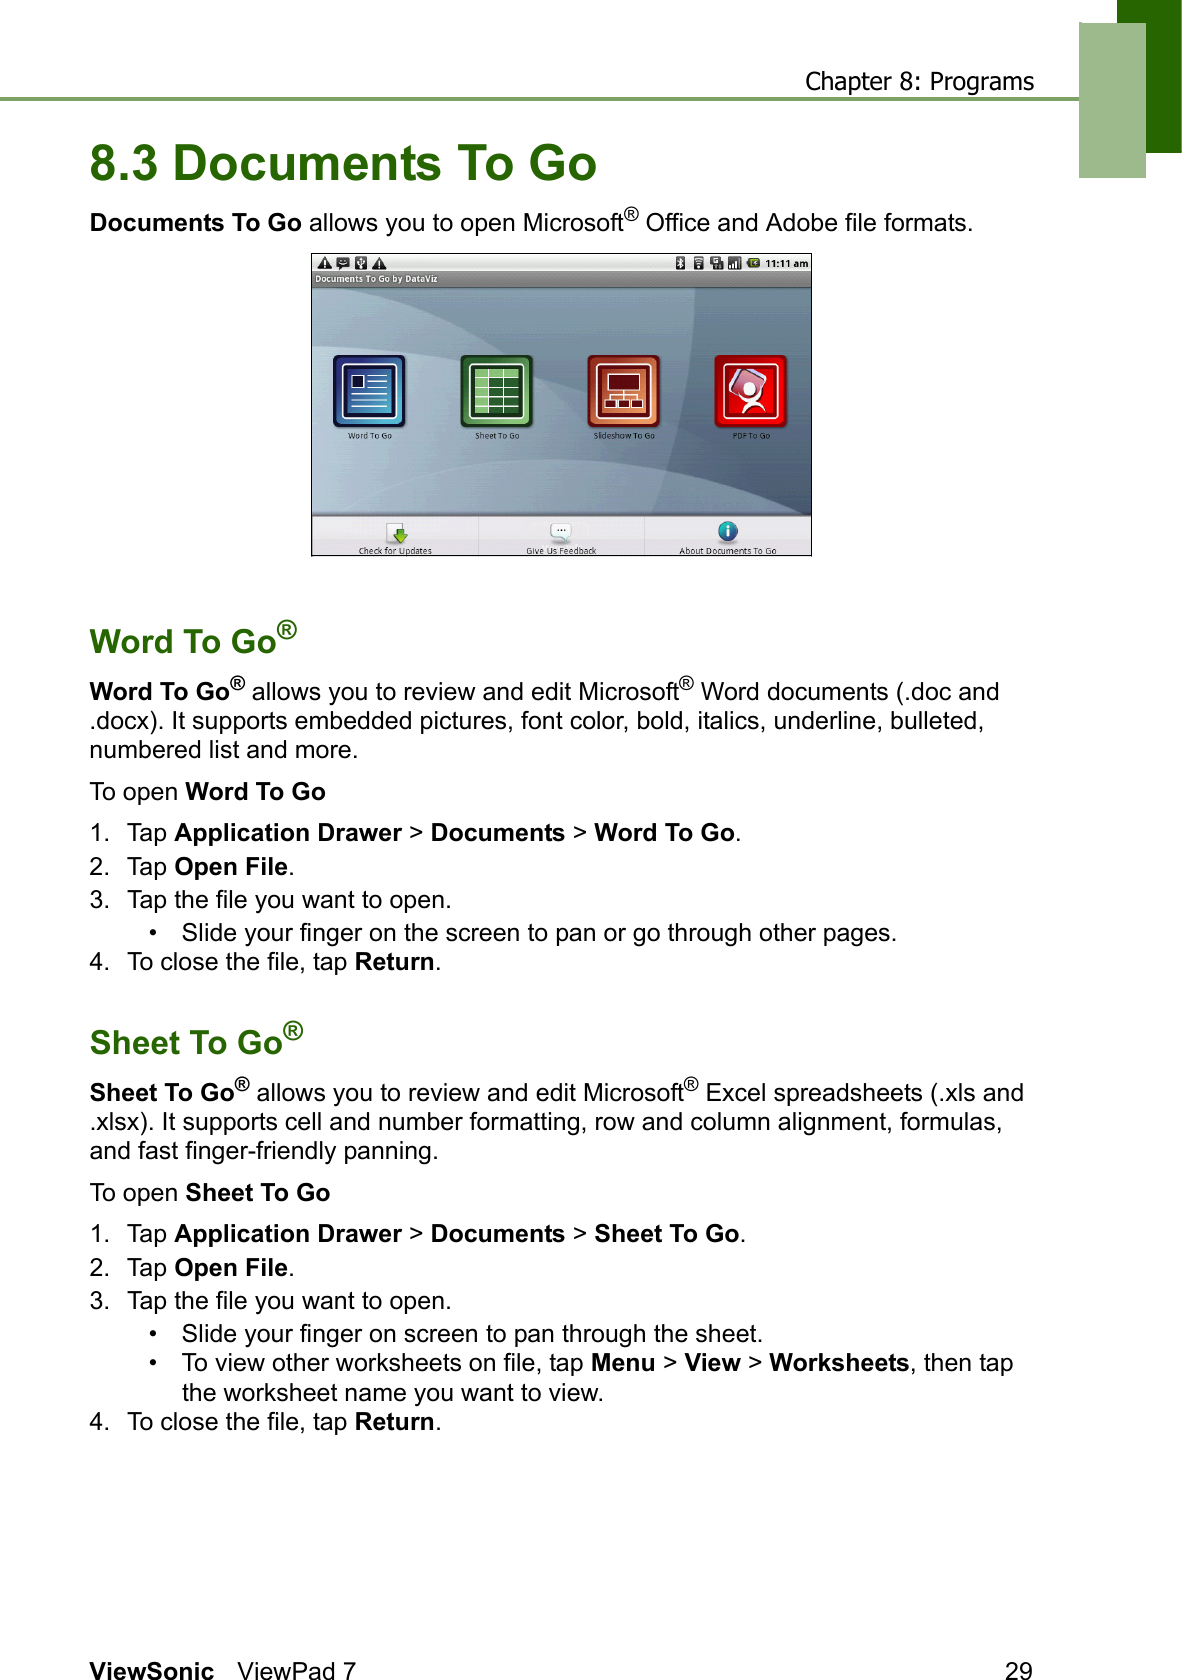 Chapter 8: ProgramsViewSonic ViewPad 7 298.3 Documents To GoDocuments To Go allows you to open Microsoft® Office and Adobe file formats.Word To Go®Word To Go® allows you to review and edit Microsoft® Word documents (.doc and .docx). It supports embedded pictures, font color, bold, italics, underline, bulleted, numbered list and more.To open Word To Go1. Tap Application Drawer &gt; Documents &gt; Word To Go.2. Tap Open File.3. Tap the file you want to open.• Slide your finger on the screen to pan or go through other pages.4. To close the file, tap Return.Sheet To Go®Sheet To Go® allows you to review and edit Microsoft® Excel spreadsheets (.xls and .xlsx). It supports cell and number formatting, row and column alignment, formulas, and fast finger-friendly panning.To open Sheet To Go1. Tap Application Drawer &gt; Documents &gt; Sheet To Go.2. Tap Open File.3. Tap the file you want to open.• Slide your finger on screen to pan through the sheet.• To view other worksheets on file, tap Menu &gt; View &gt; Worksheets, then tap the worksheet name you want to view.4. To close the file, tap Return.